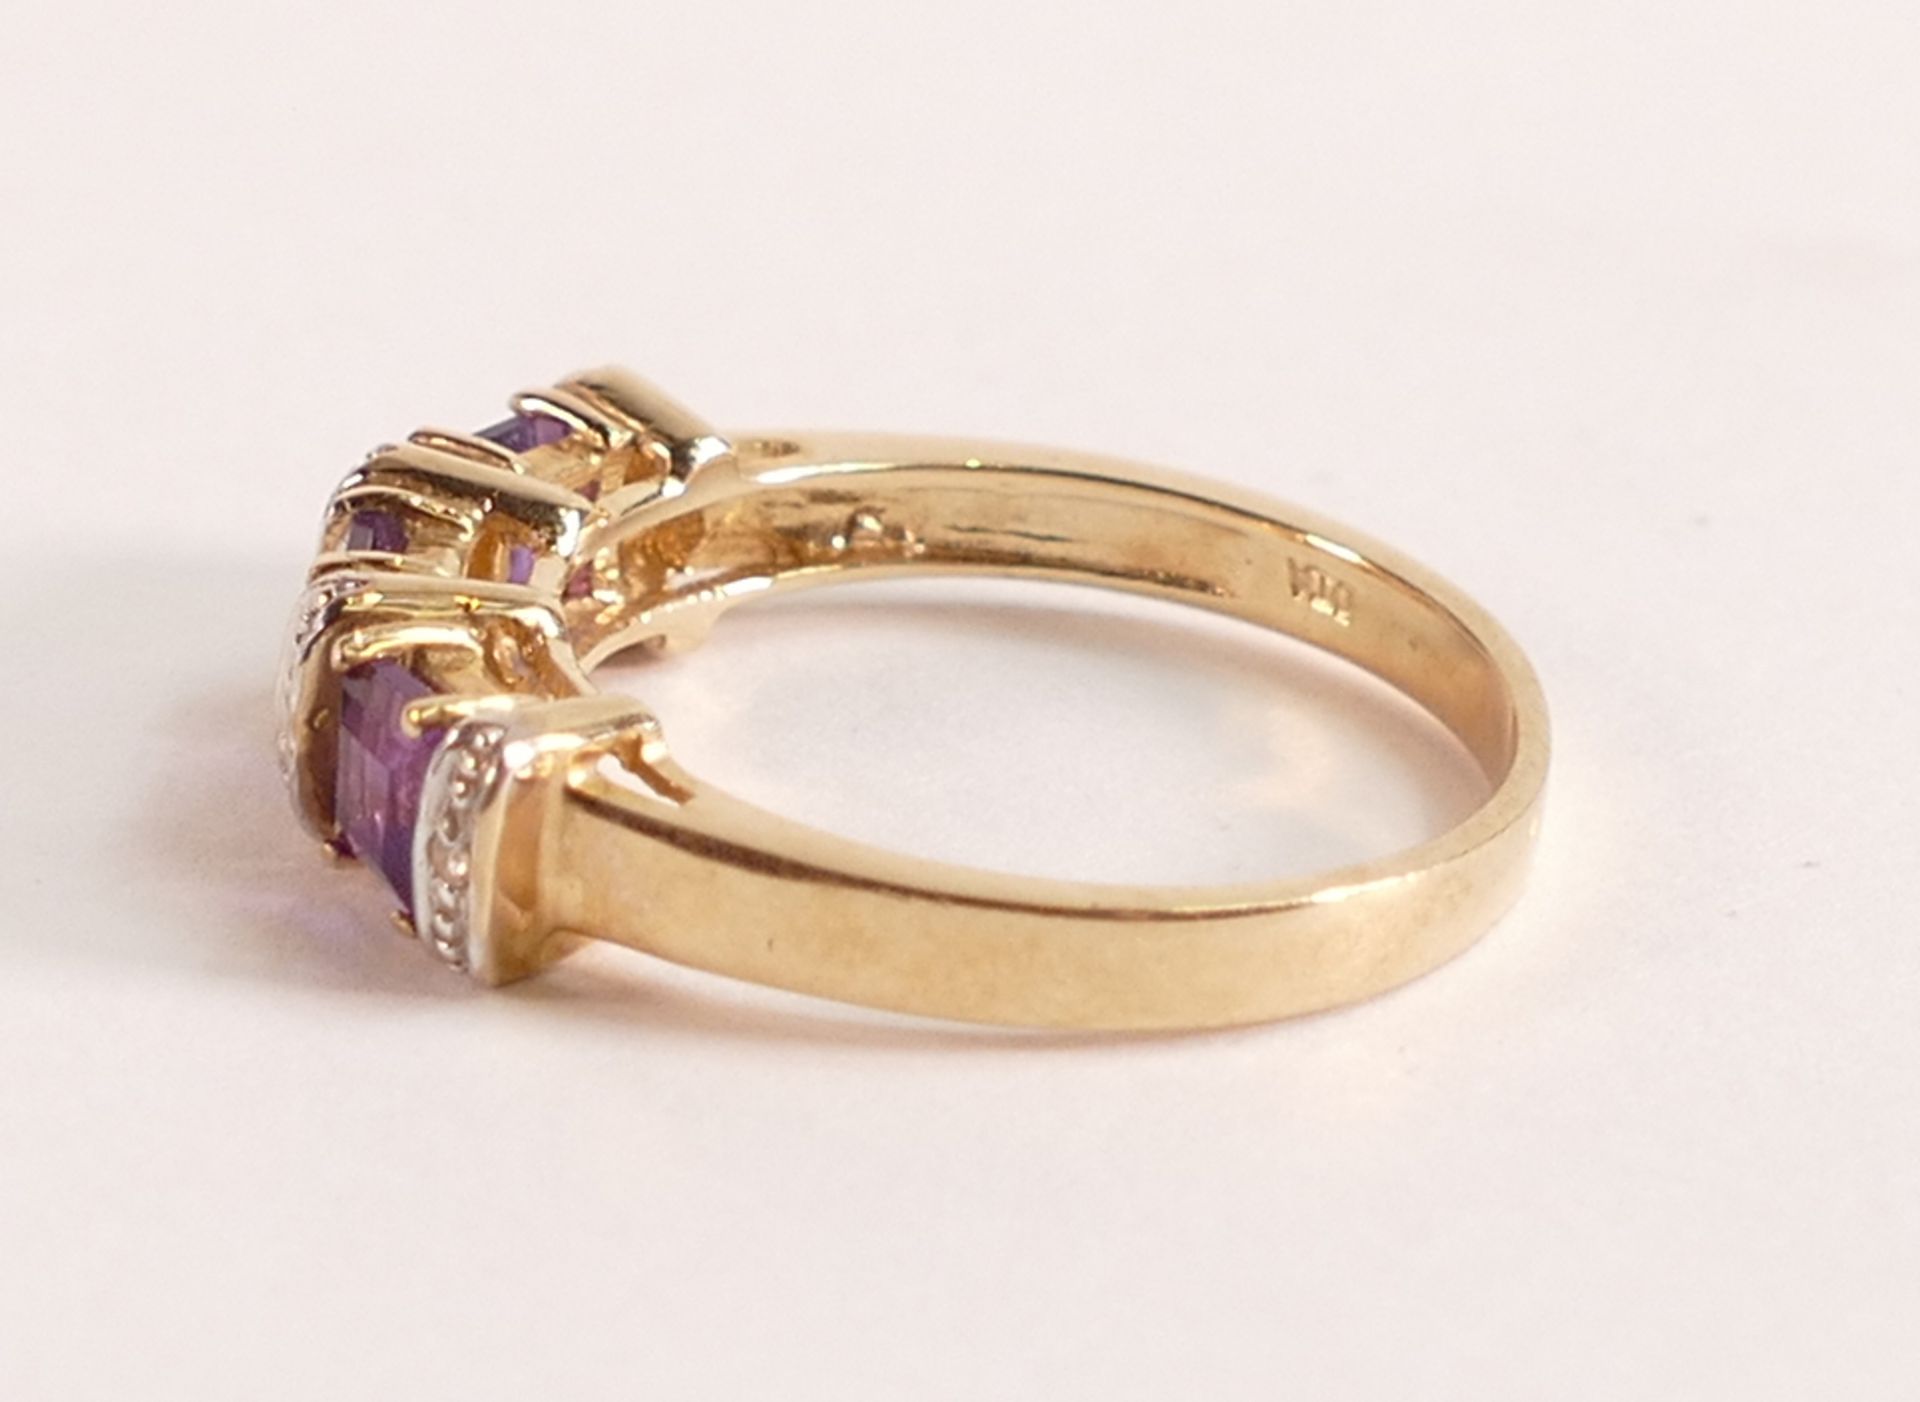 9ct Yellow Gold Amethyst and Diamond Ring, preowned, 2.8 grams, ring size P. - Image 2 of 3